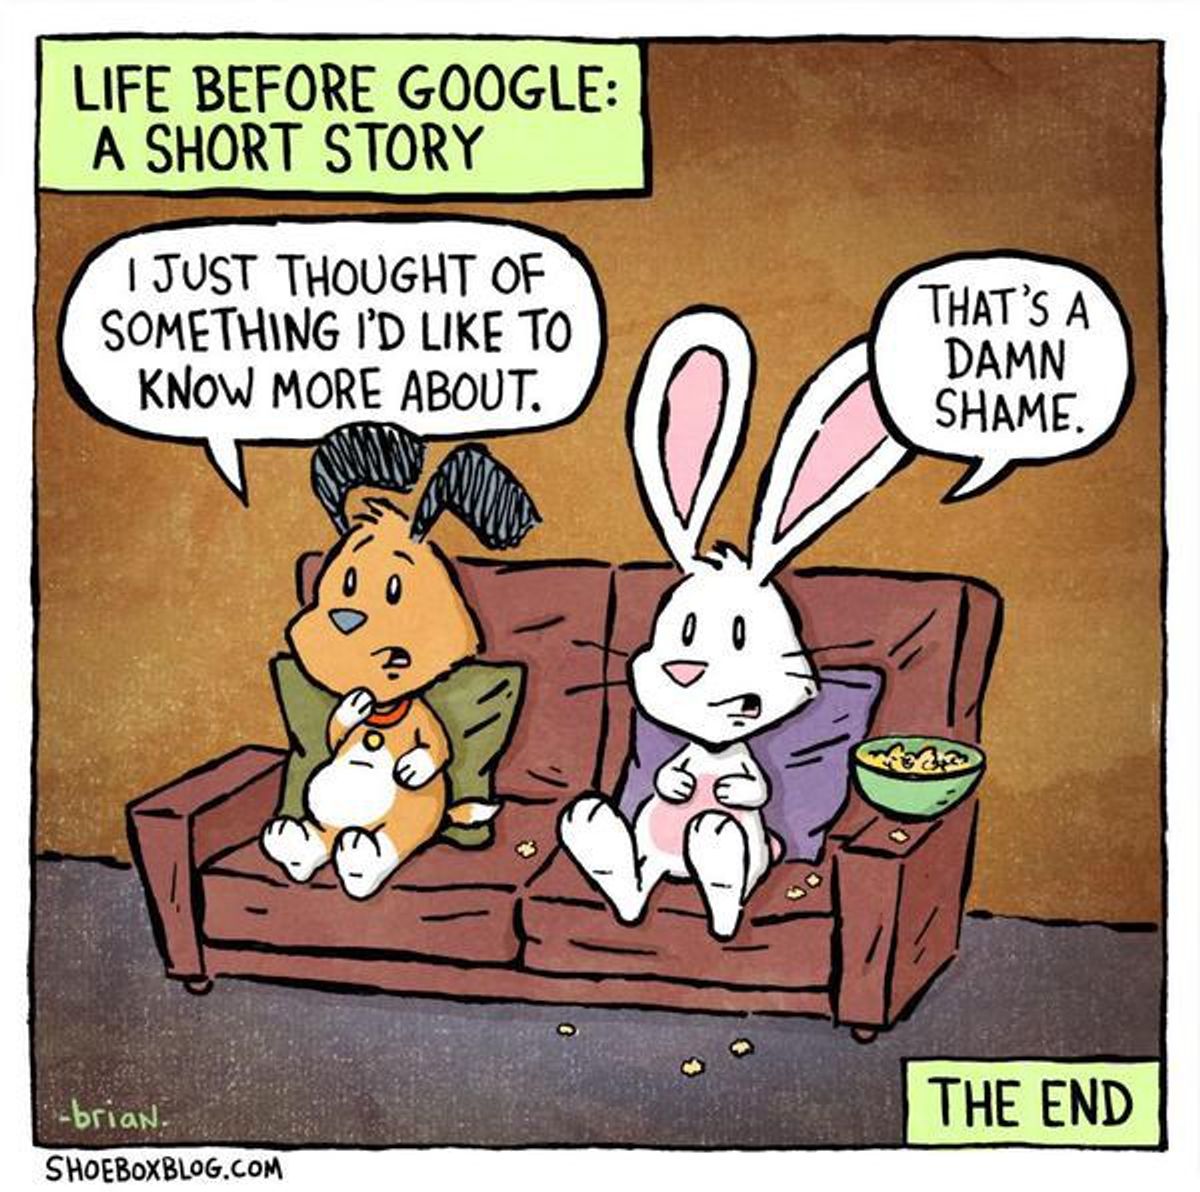 Do You Have A Best Friend Named Google?